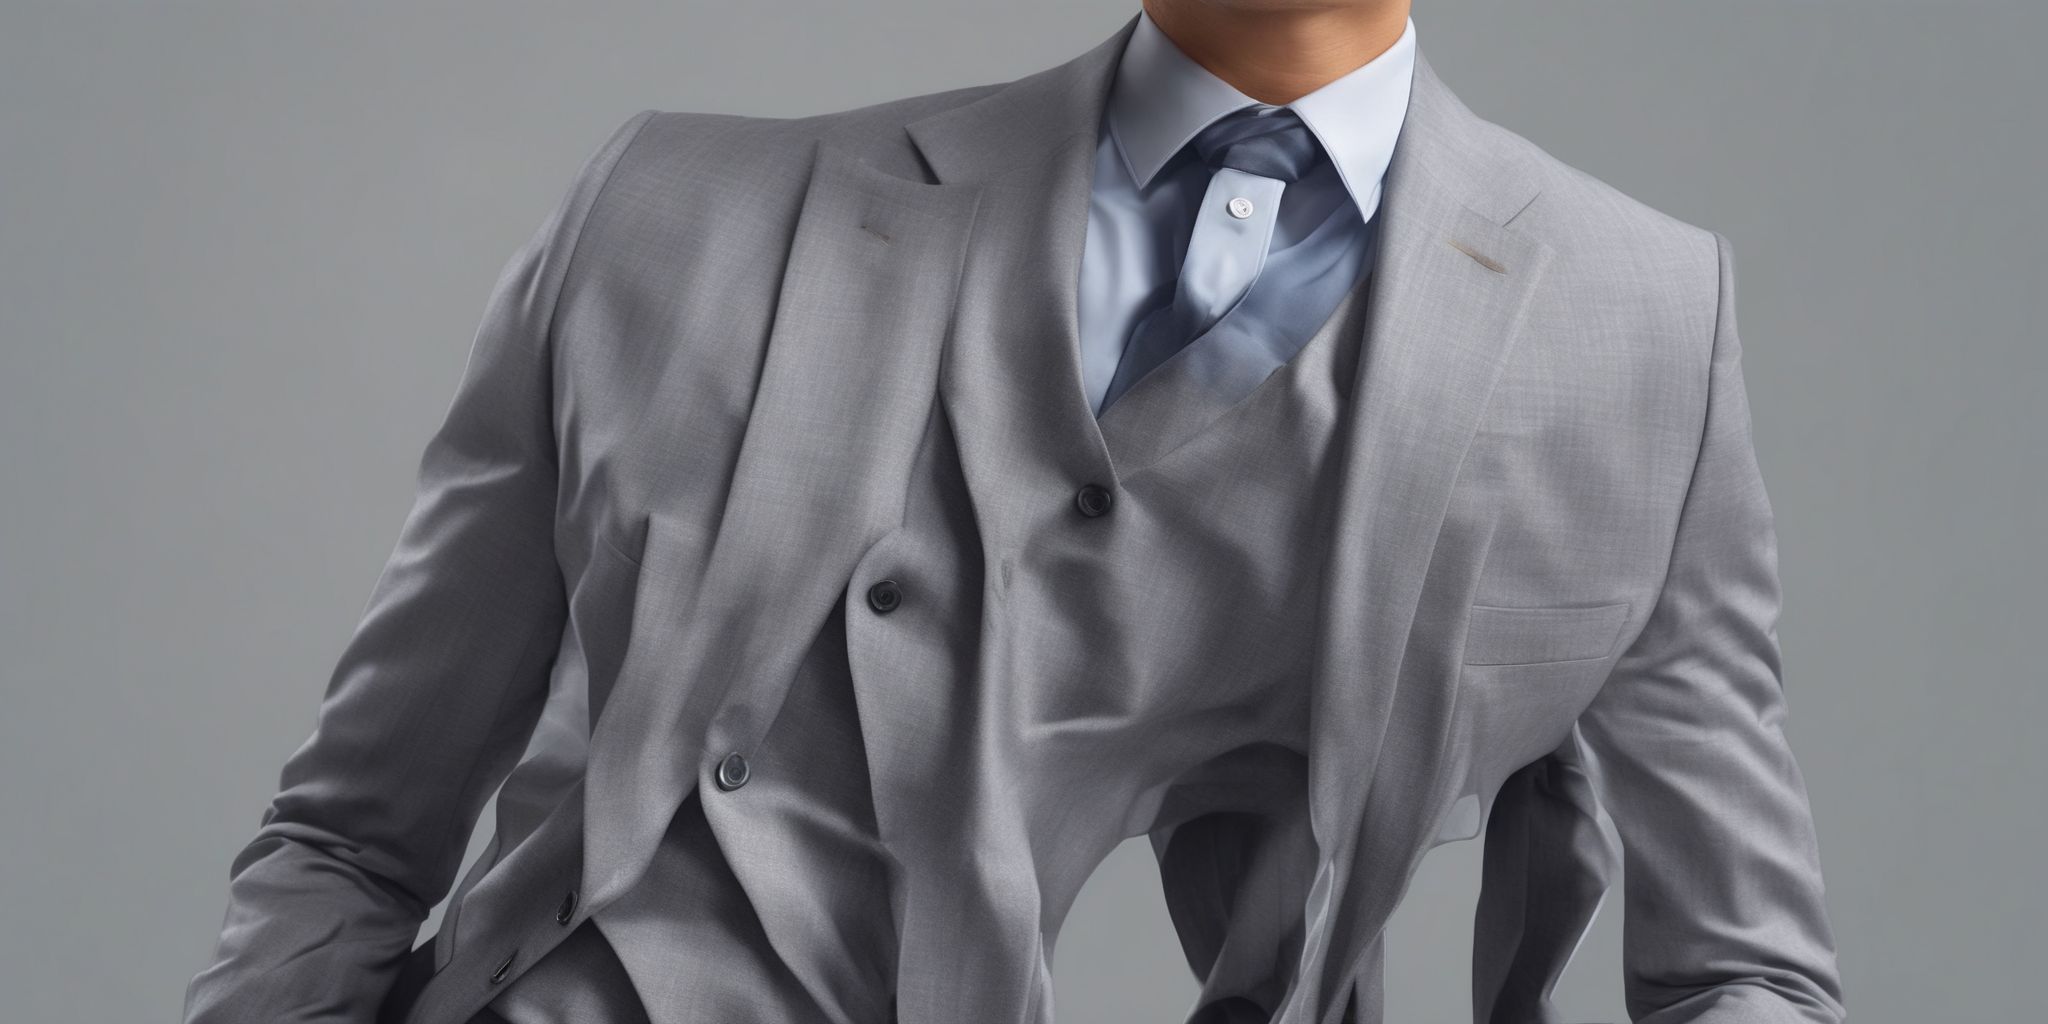 Suit  in realistic, photographic style